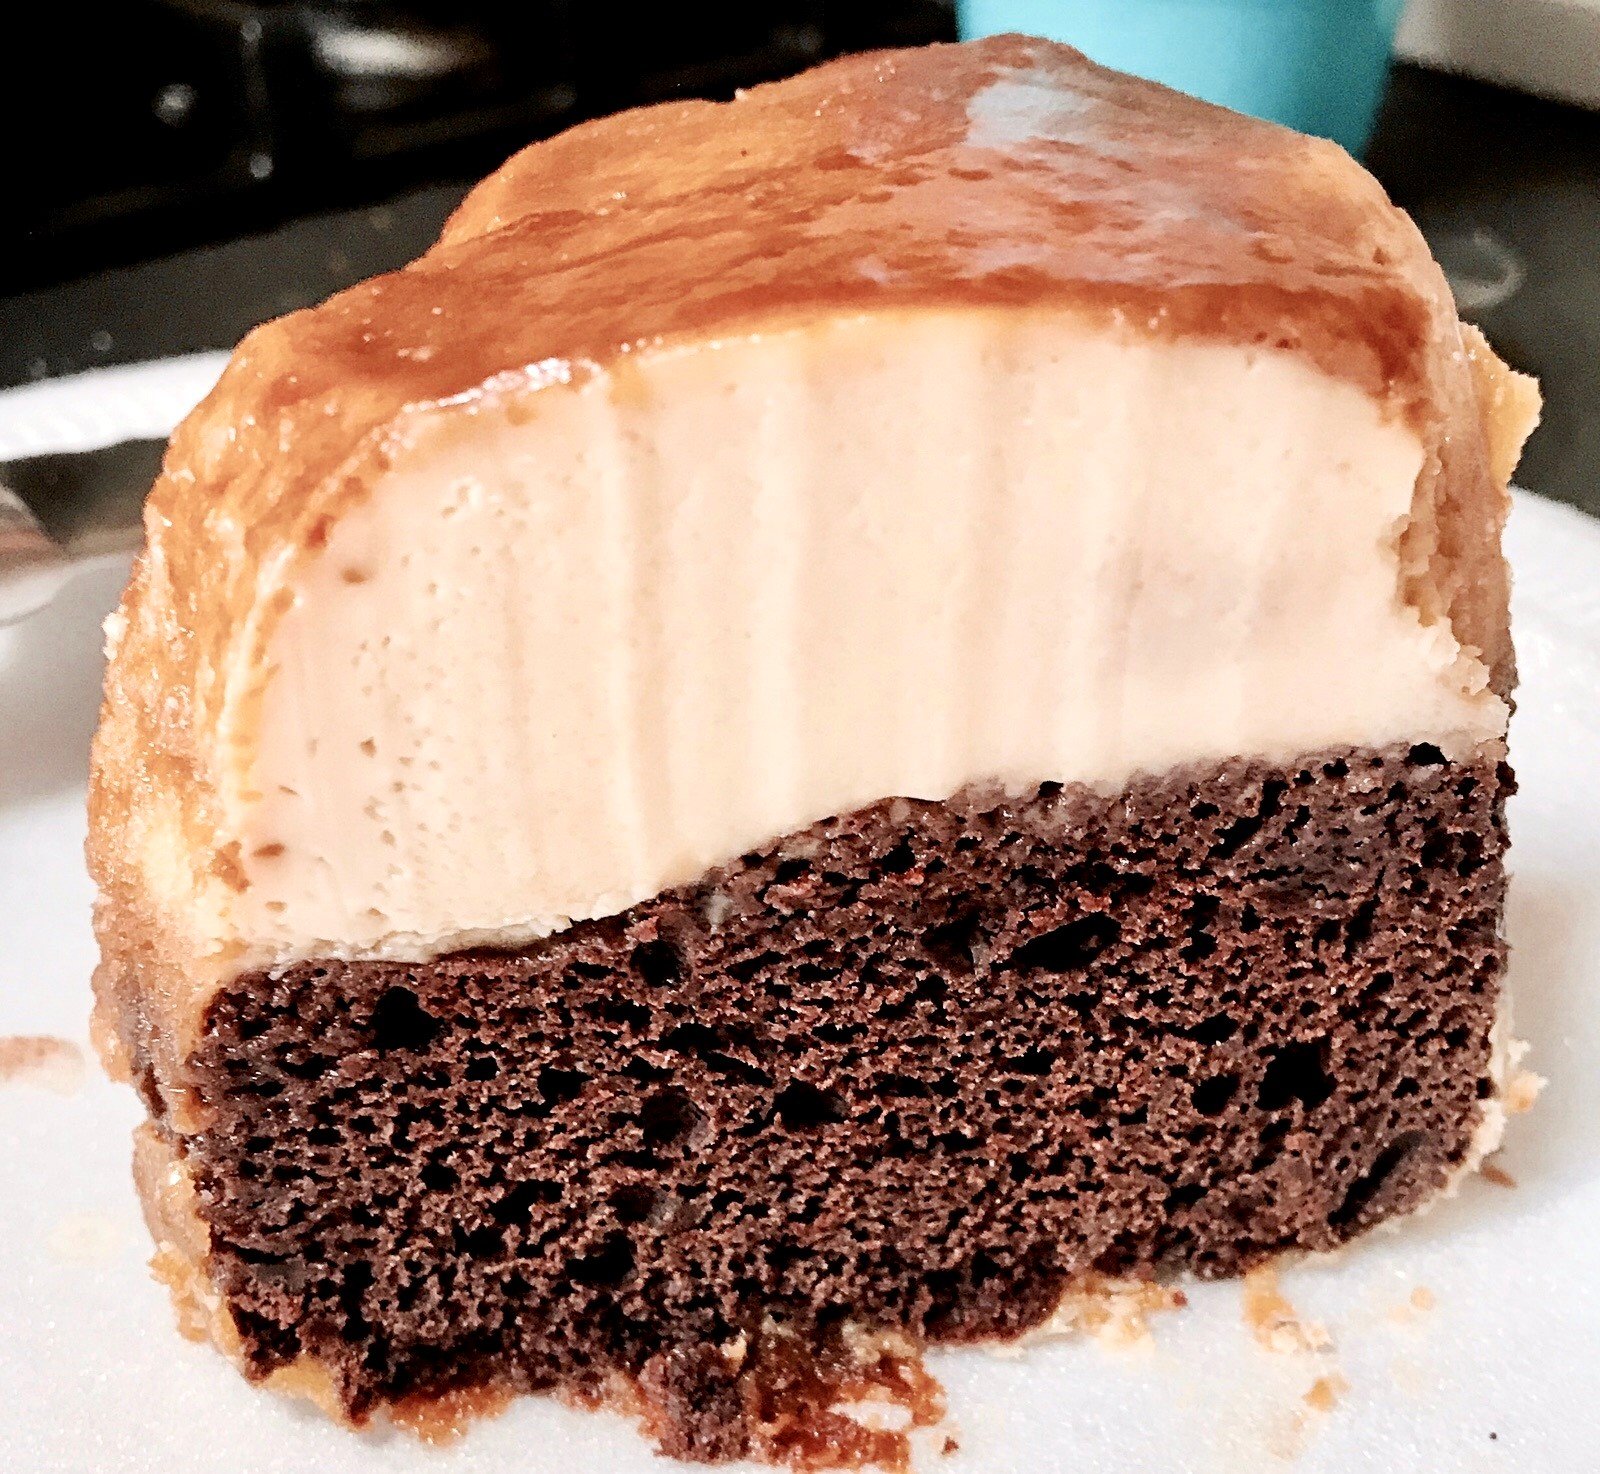 Tried to bake a Chocoflan. What went wrong? Details in comments